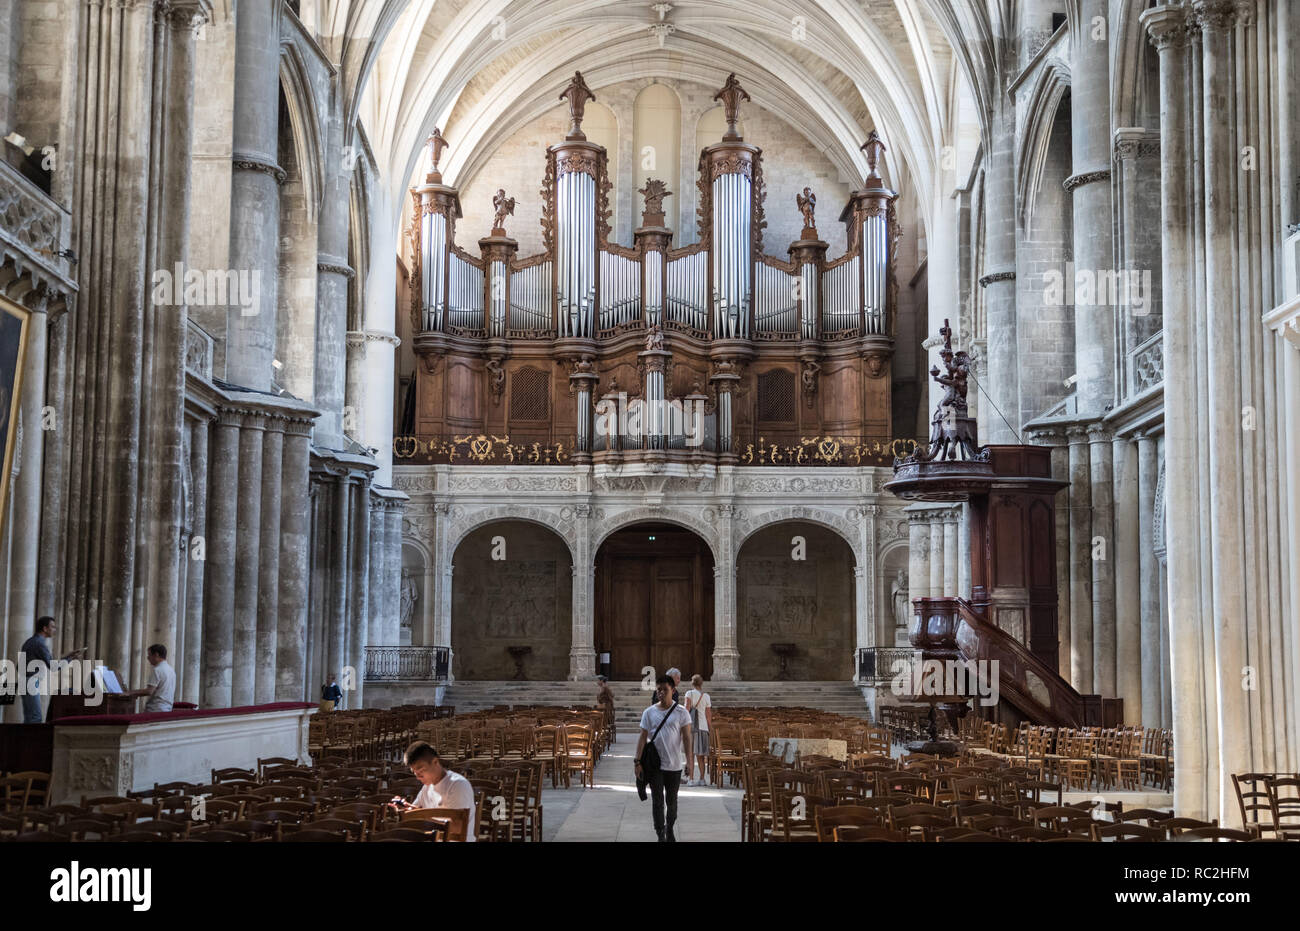 Bordeaux, France - 27th September, 2018: Interior architecture of  Cathedral Saint Andre in Bordeaux, France Stock Photo